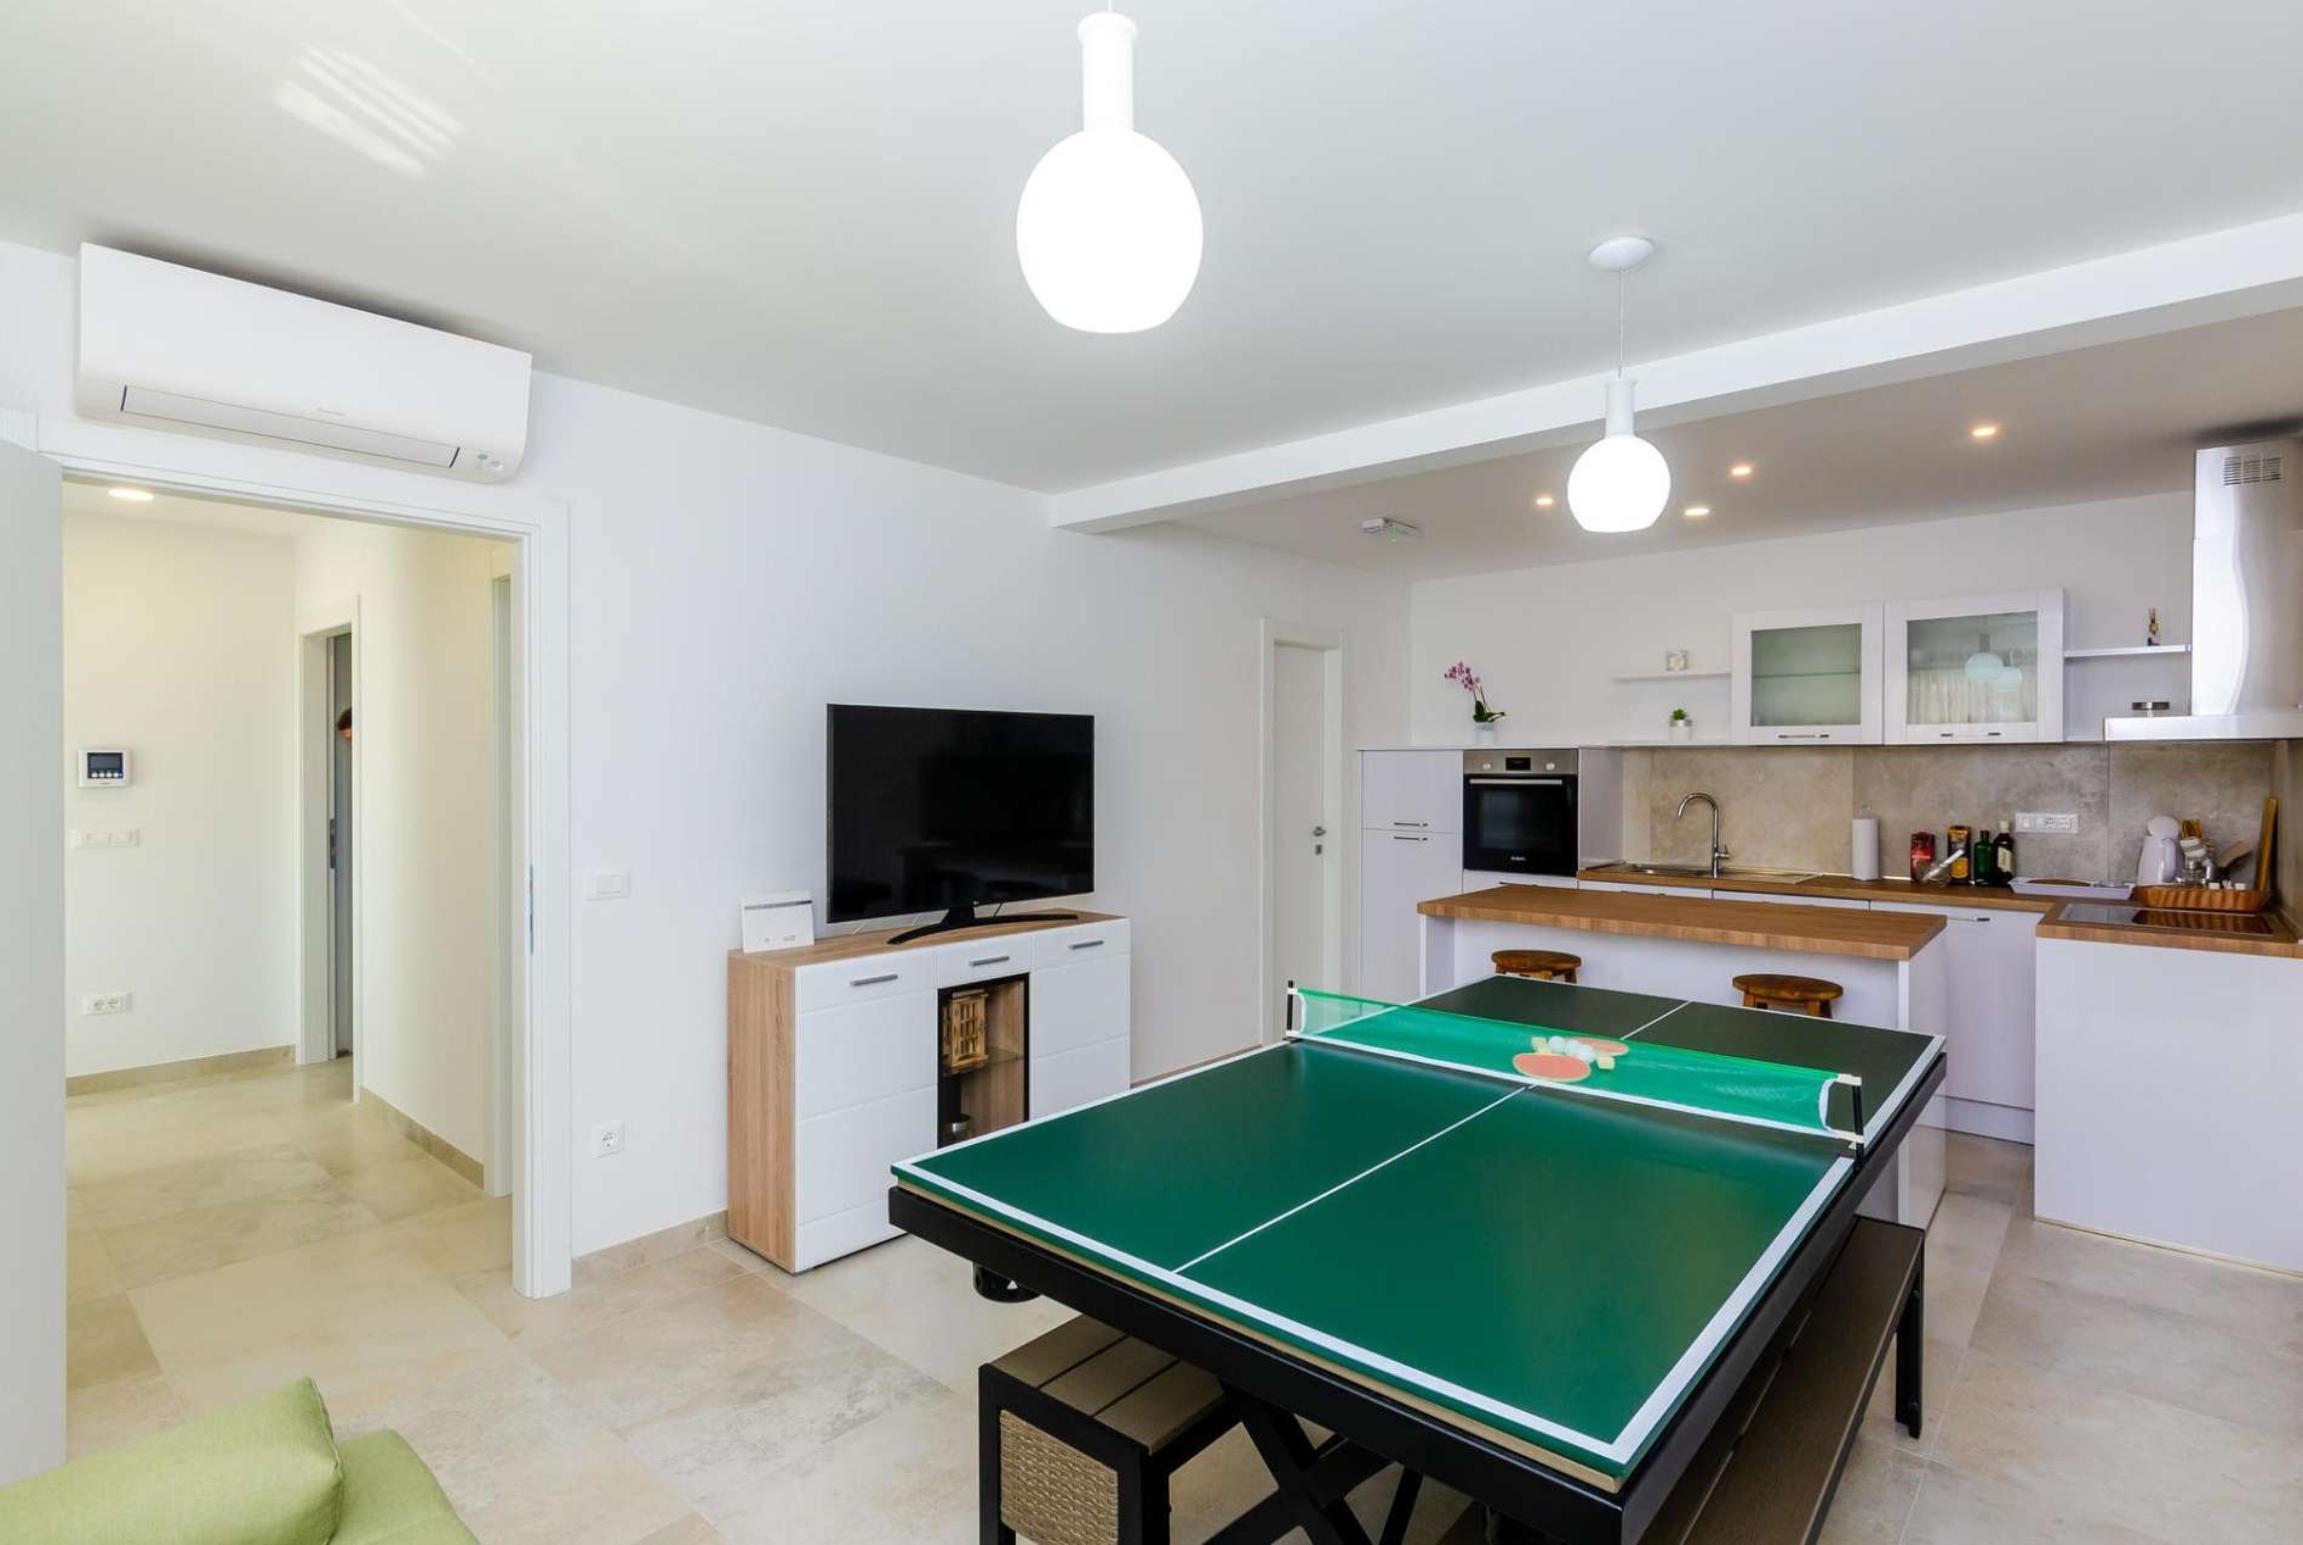 Property Image 2 - Stone house, large garden, pool, table tennis